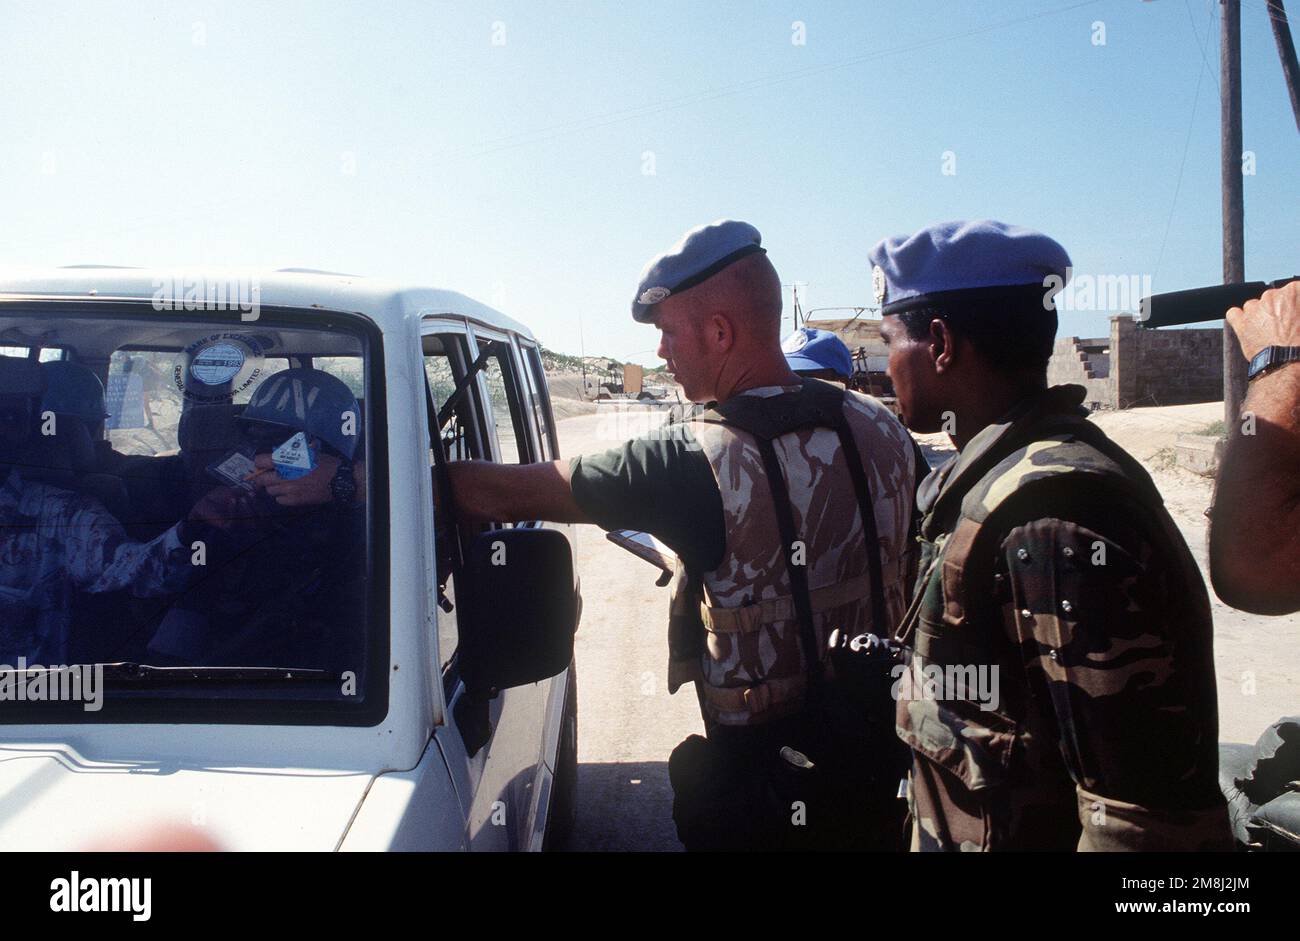 A Belgian soldier performs a security check on a vehicle trying to enter the compound in Kismayo. The Belgian contingent is part of the United Nations Forces in Somalia in support of OPERATION CONTINUE HOPE. Subject Operation/Series: CONTINUE HOPE Base: Kismayo Country: Somalia (SOM) Stock Photo